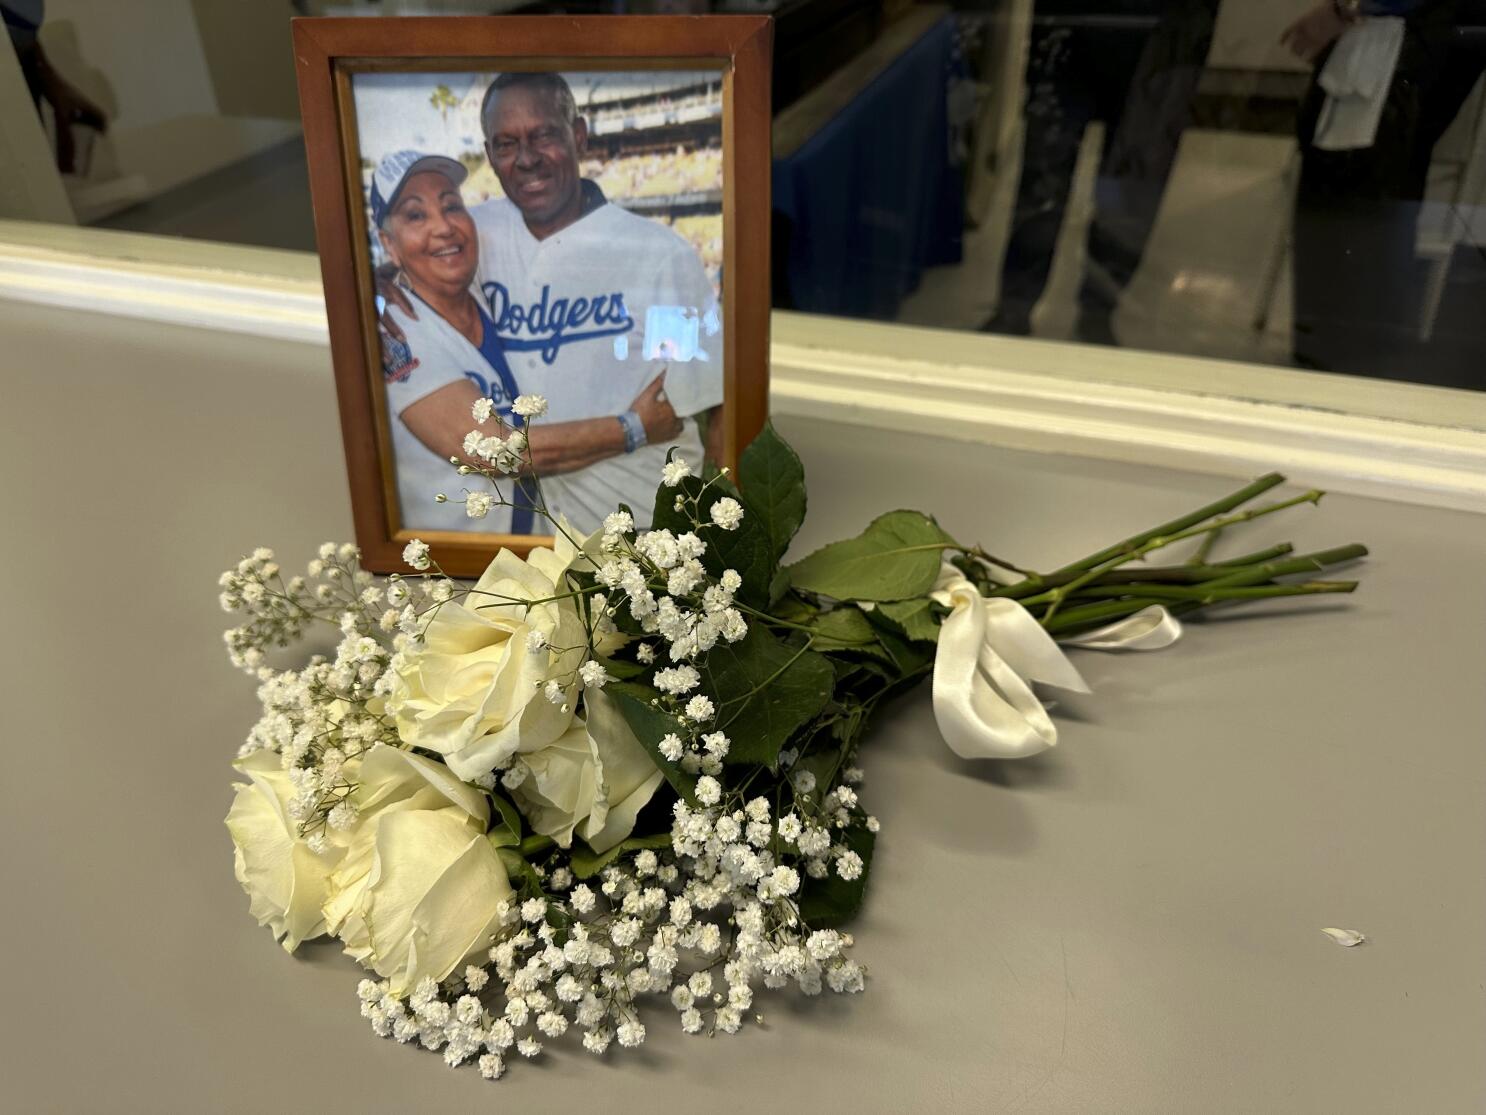 Margarita Mota, the wife of Dodgers great Manny Mota and matriarch of a  baseball family, dies at 81 - The San Diego Union-Tribune